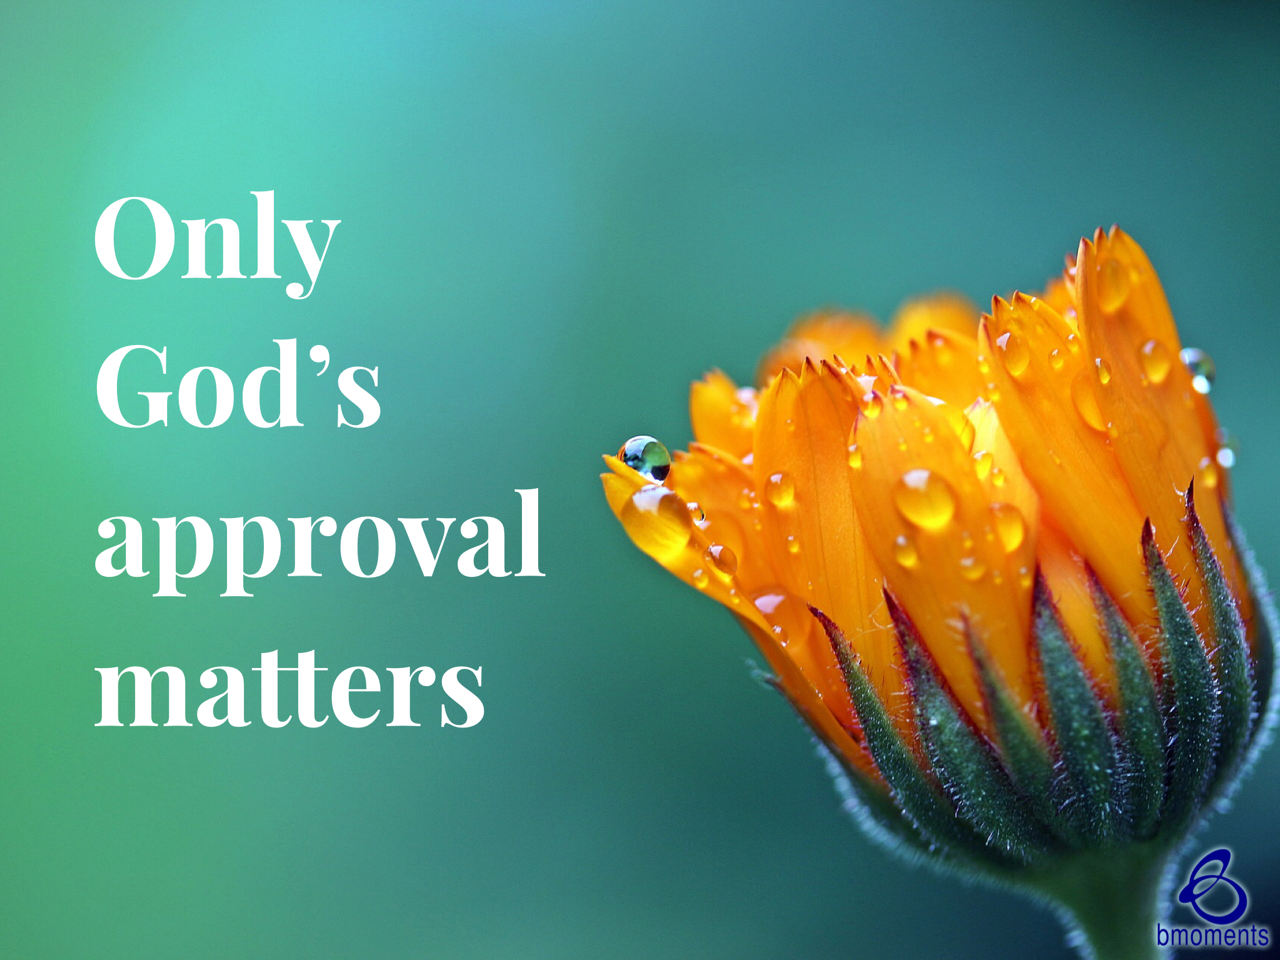 Remember Whose Approval Matters Most